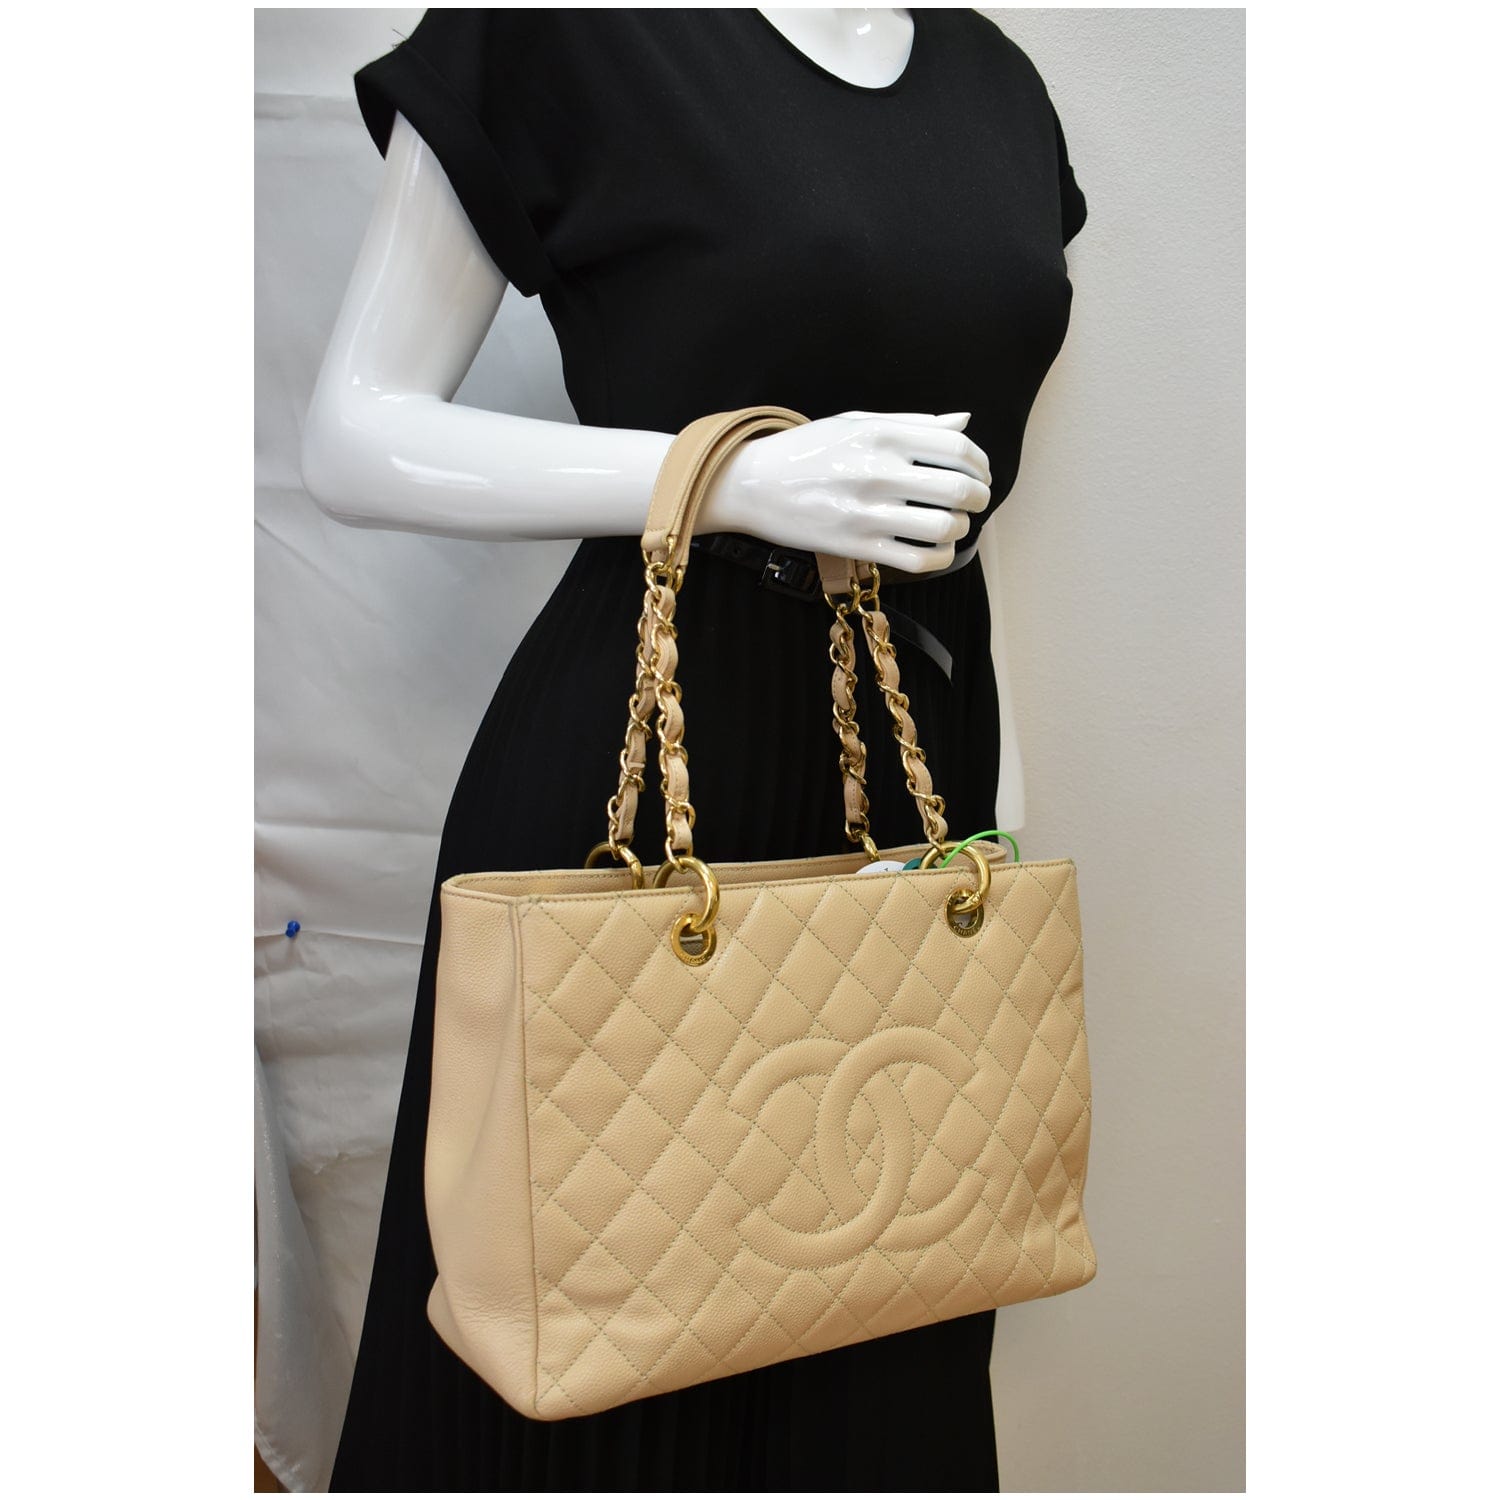 Grand Shopping Tote Bag in Caviar Leather, Gold Hardware